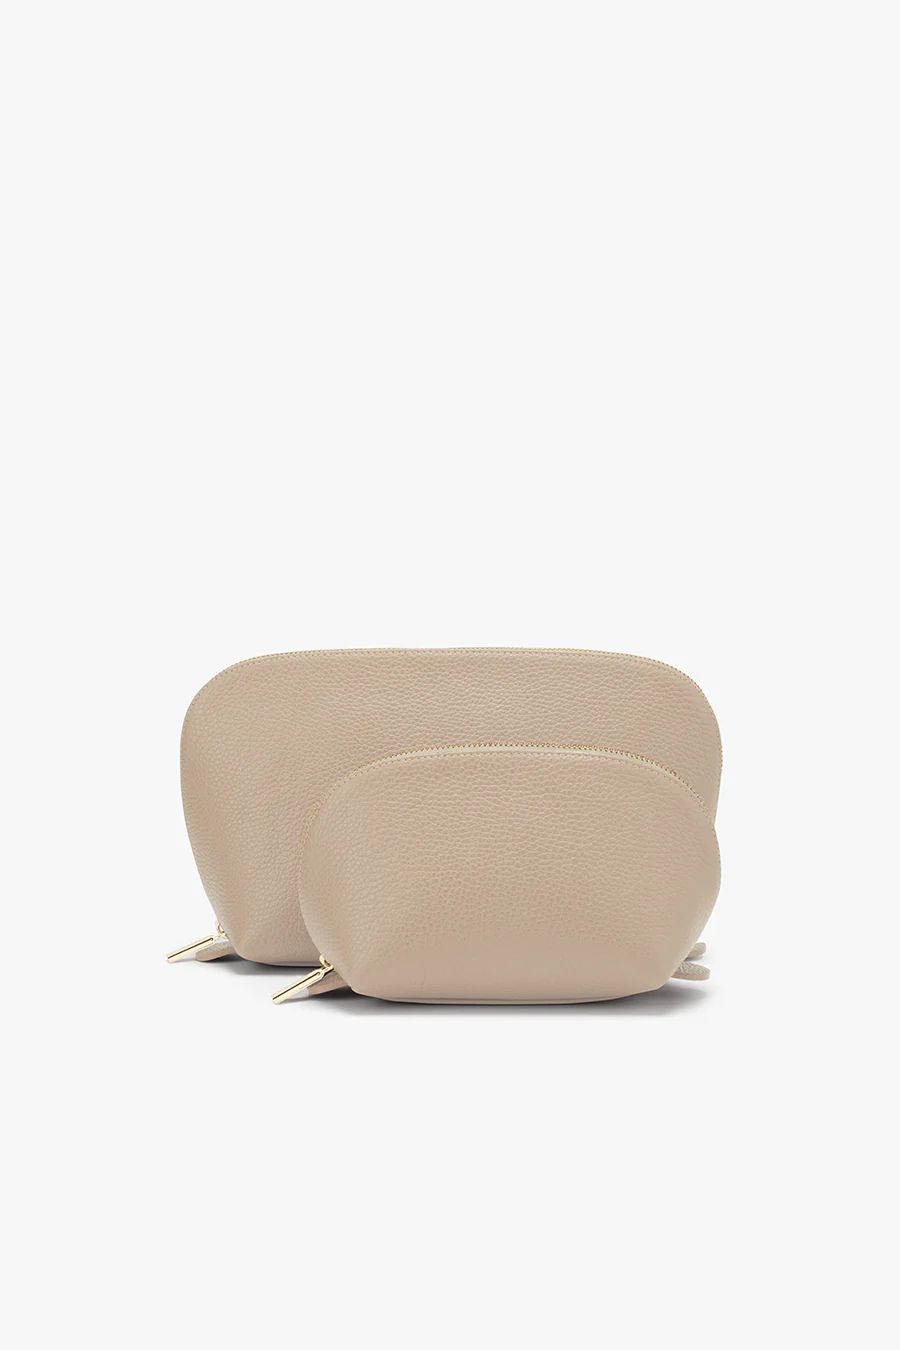 Small Leather Goods | Cuyana